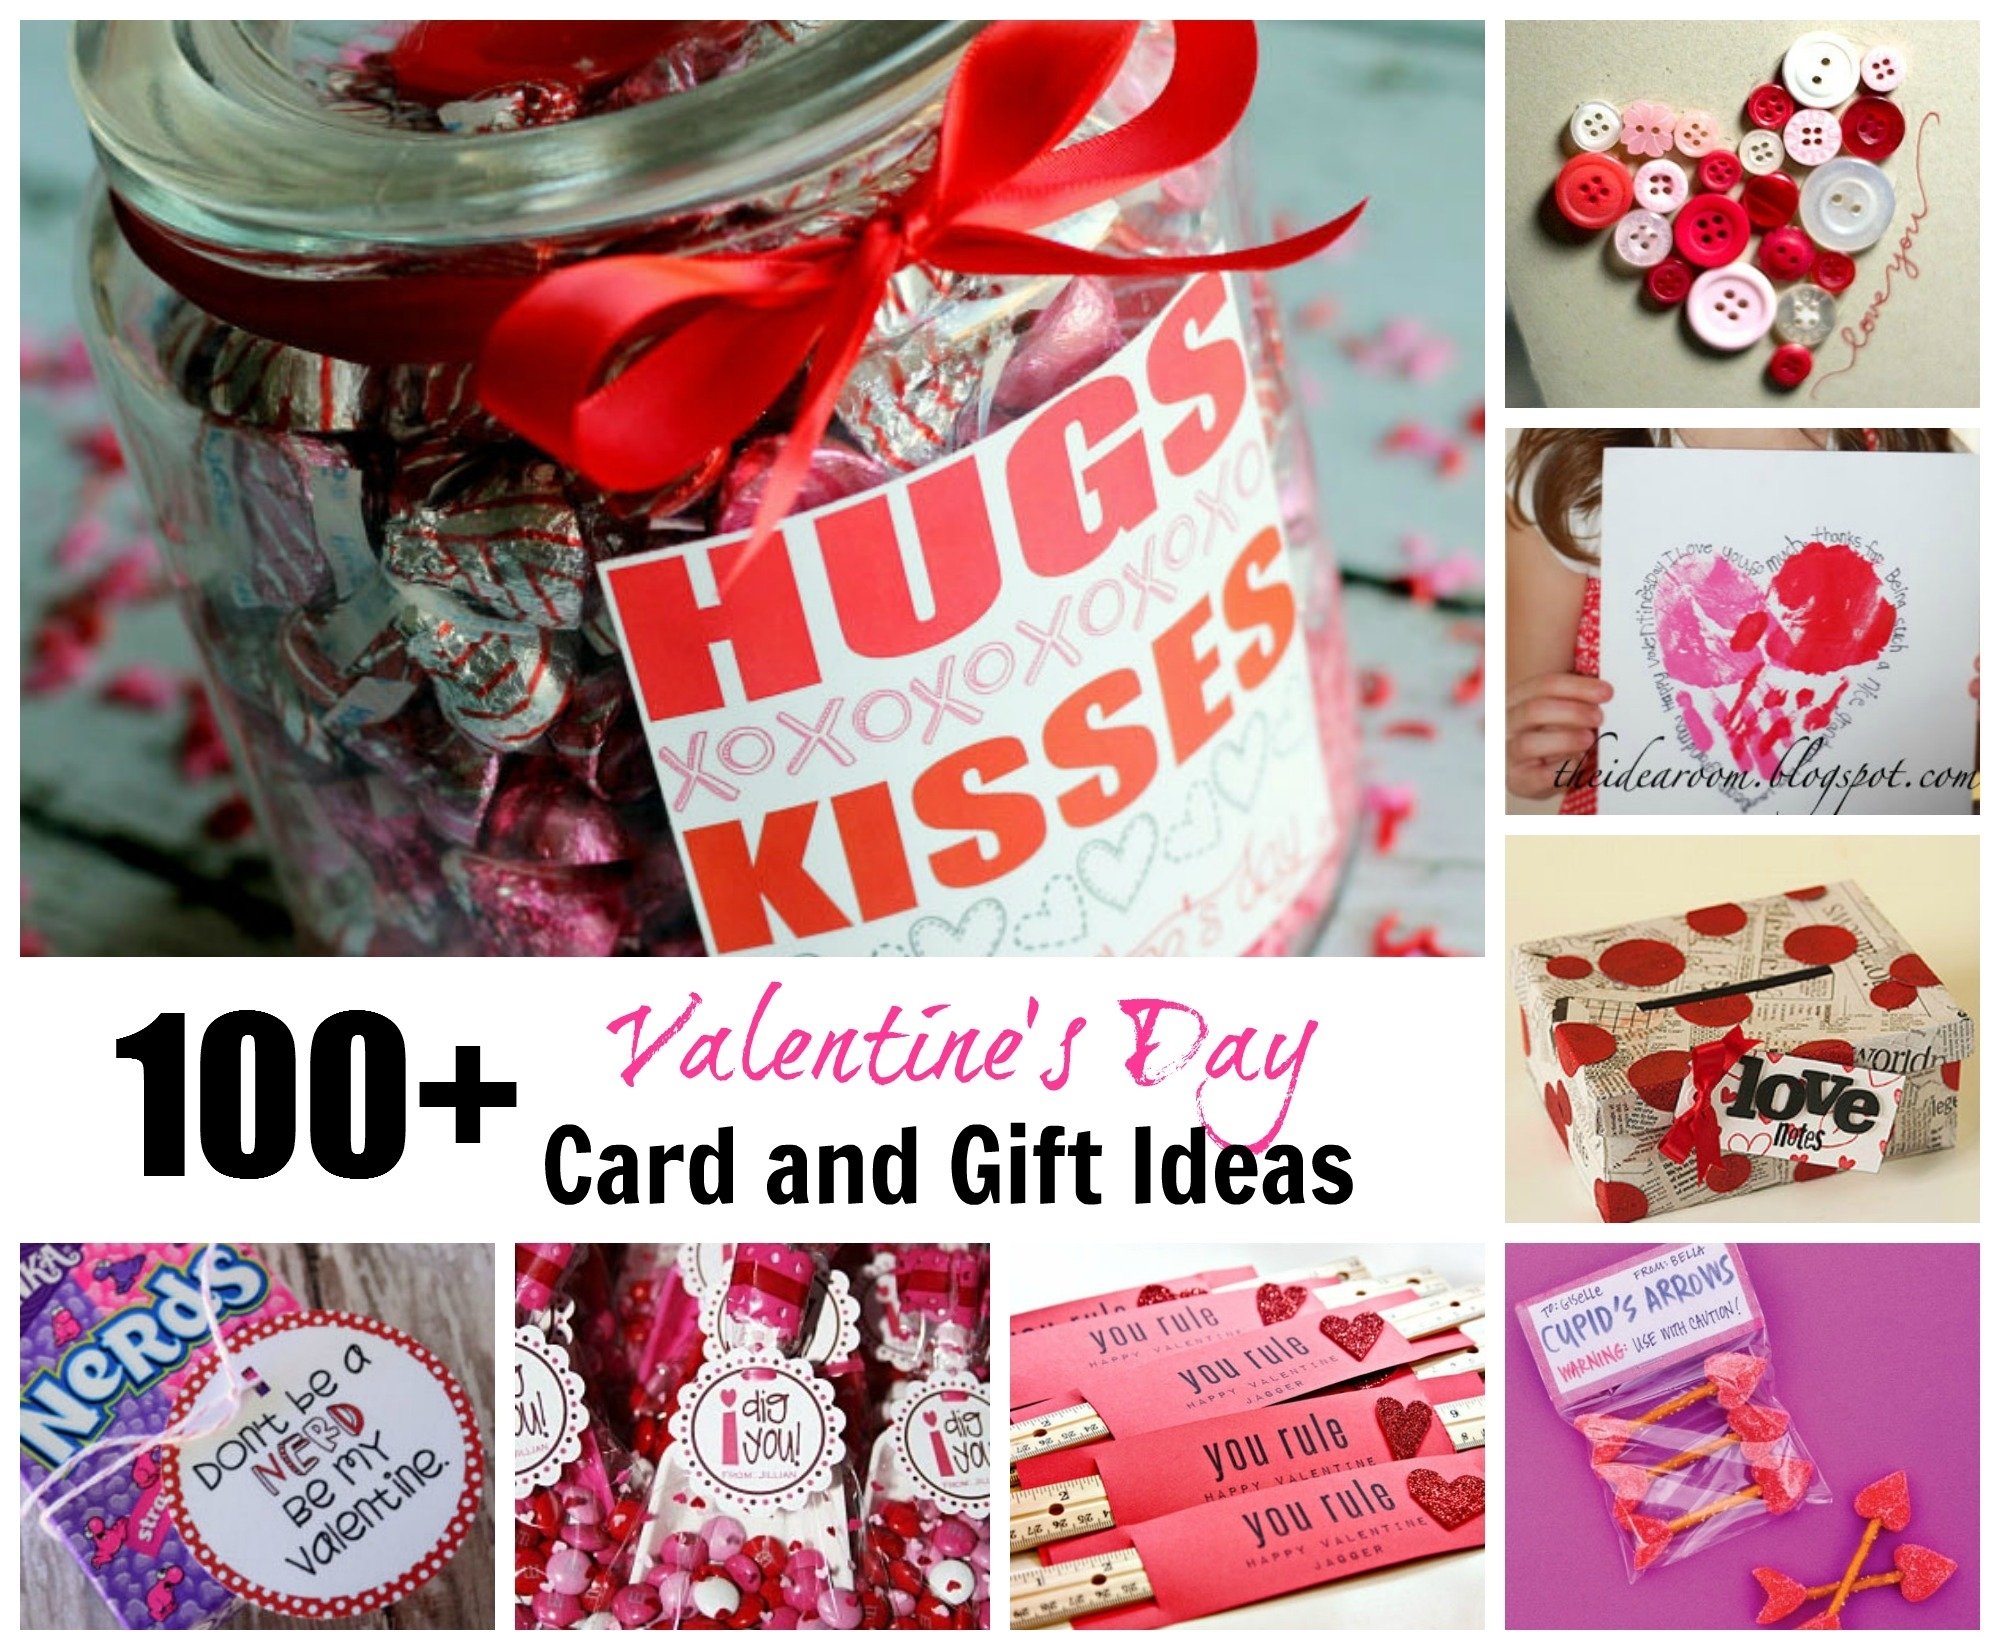 10 Lovable Homemade Valentines Ideas For Him homemade valentines day ideas for boyfriend startupcorner co 2 2022